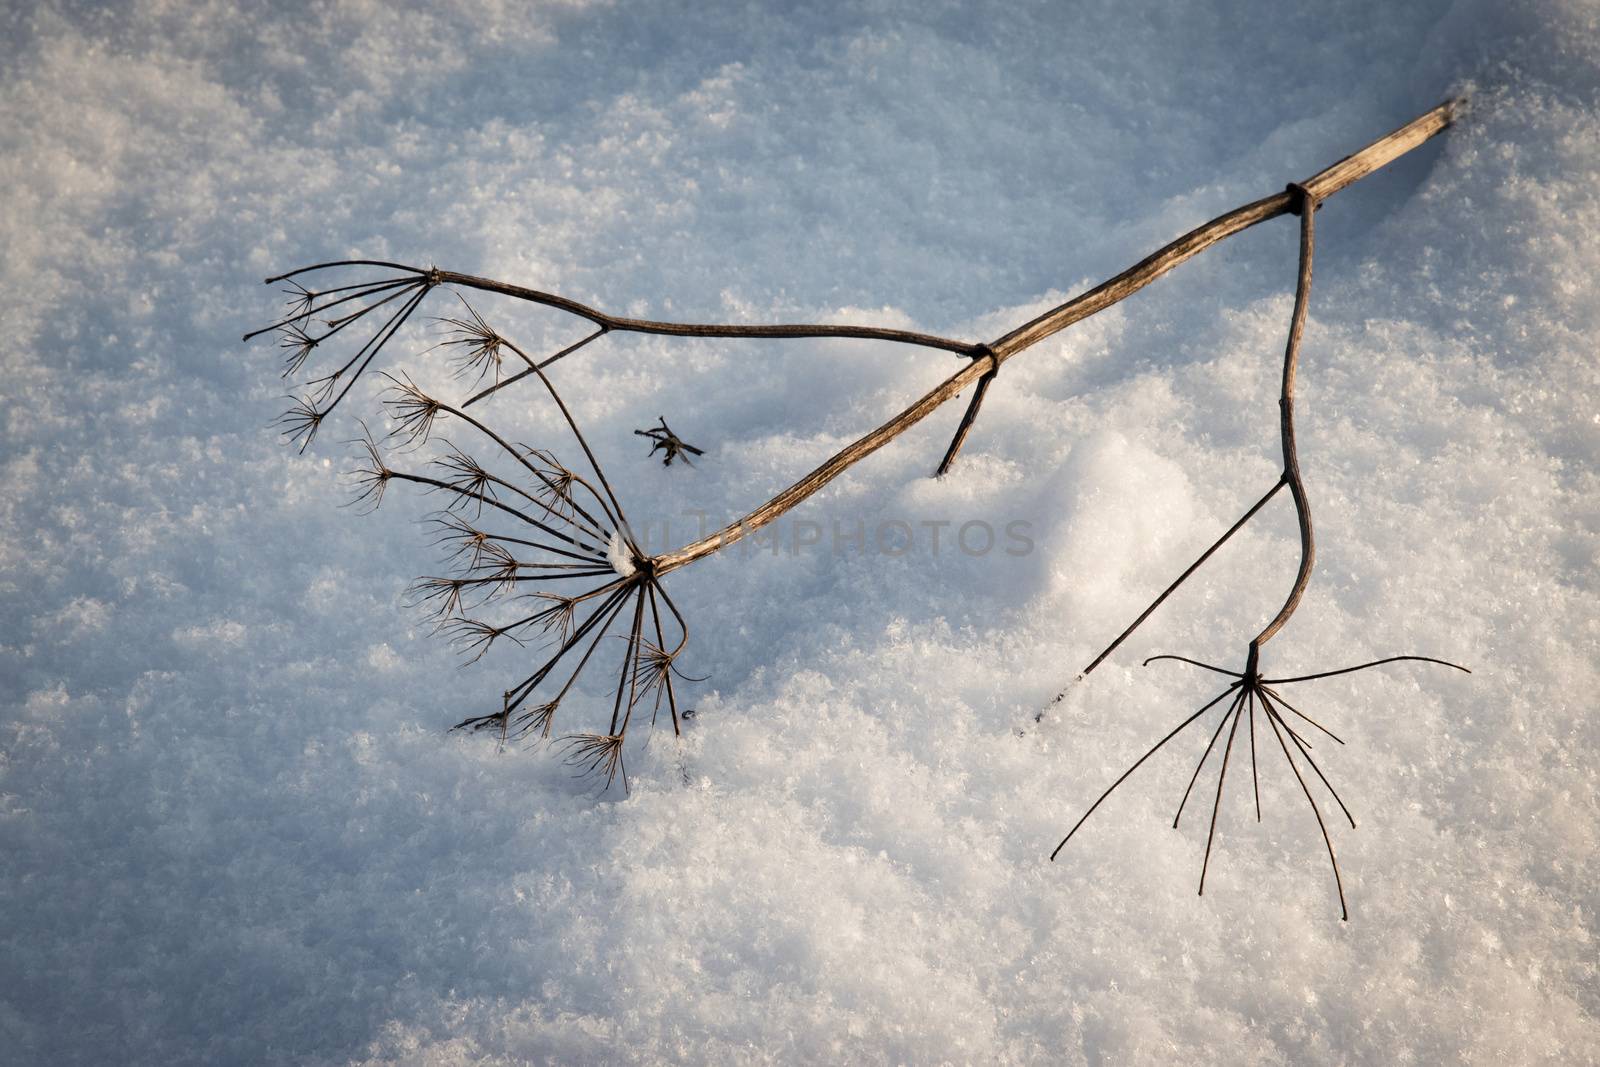 A fallen dry plant on the snow by Ahojdoma